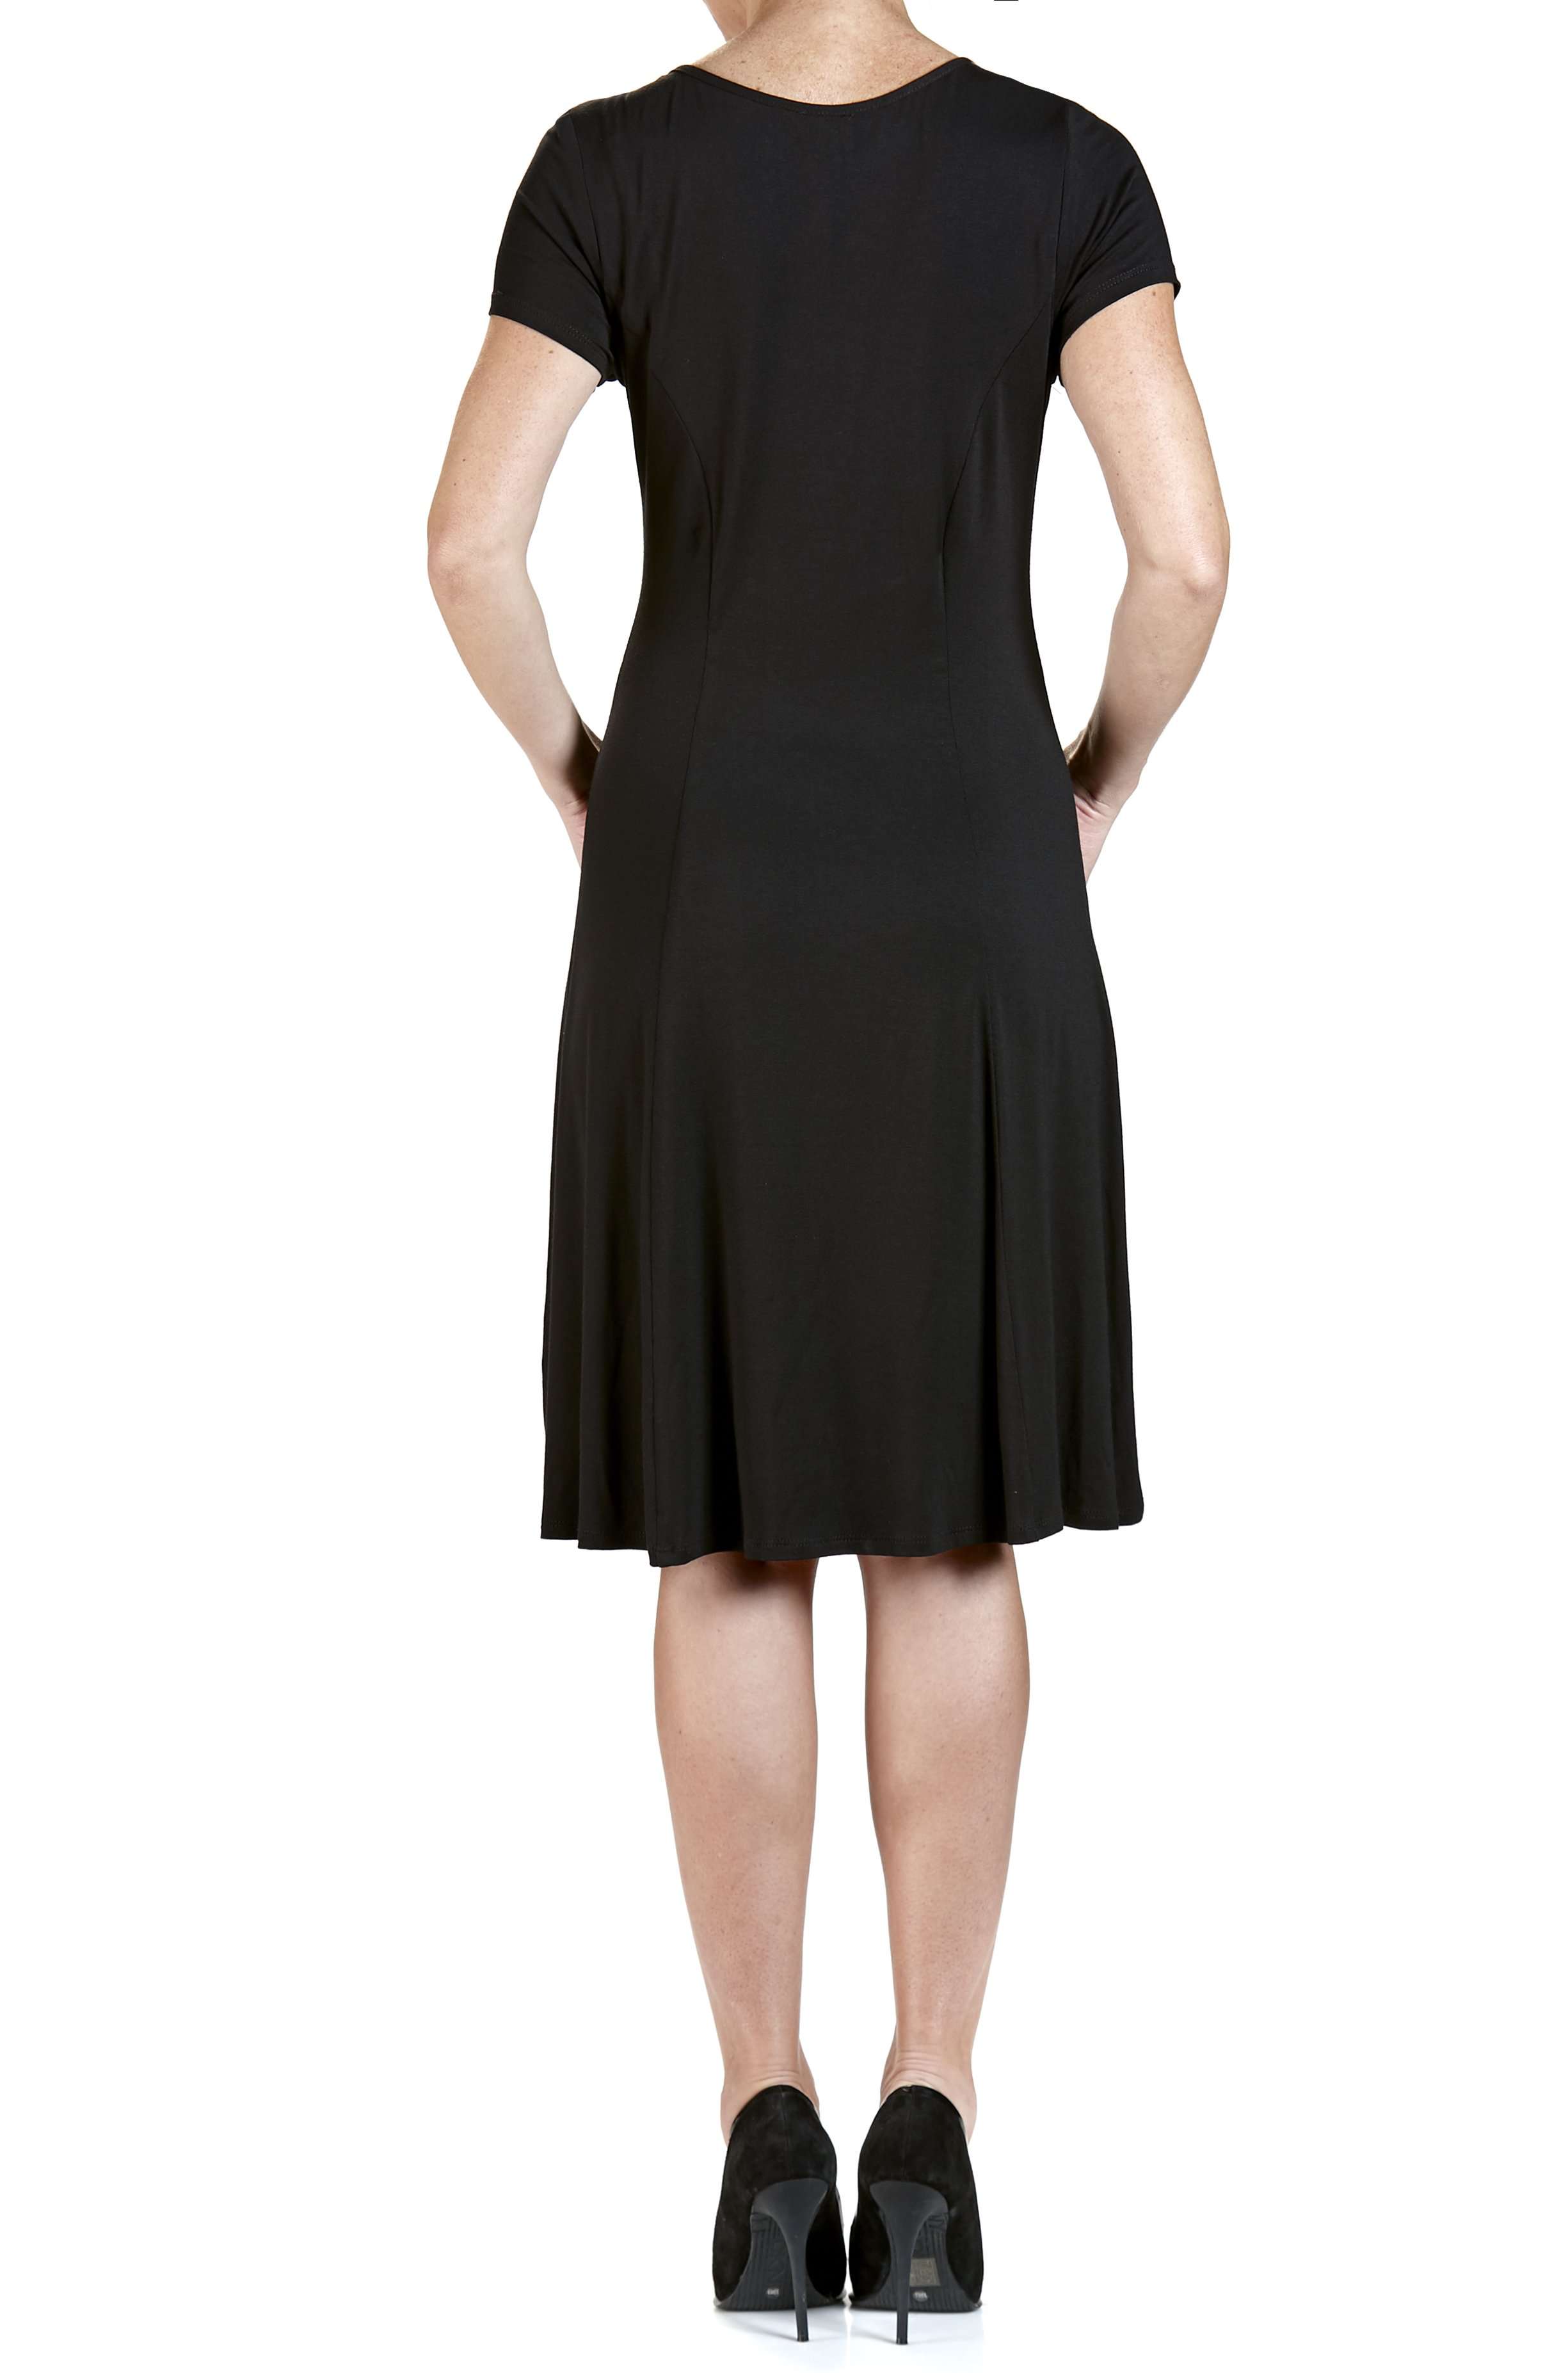 Women's Dress Black Quality Stretch Comfort Fabric Flattering Fit Made in Canada Yvonne Marie Boutiques - Yvonne Marie - Yvonne Marie